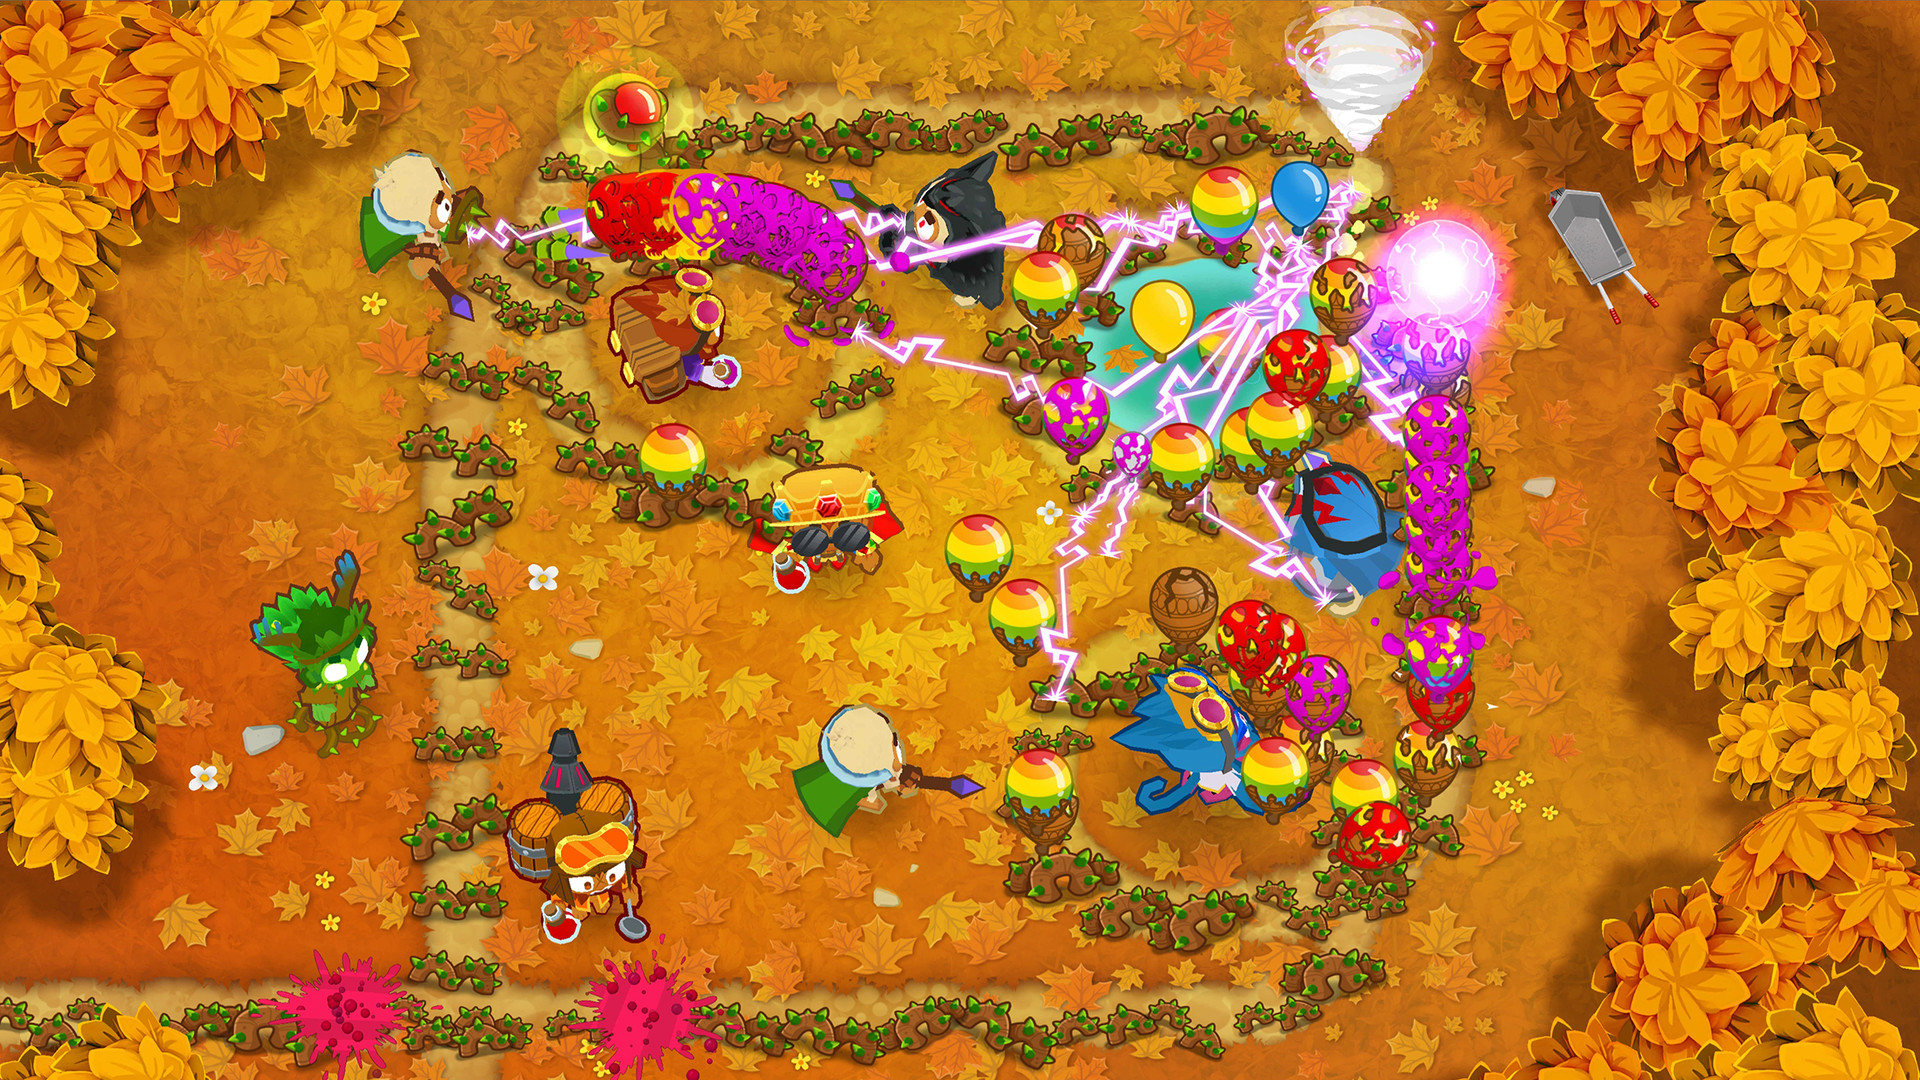 Bloons Tower Defense 3&& Try The Games